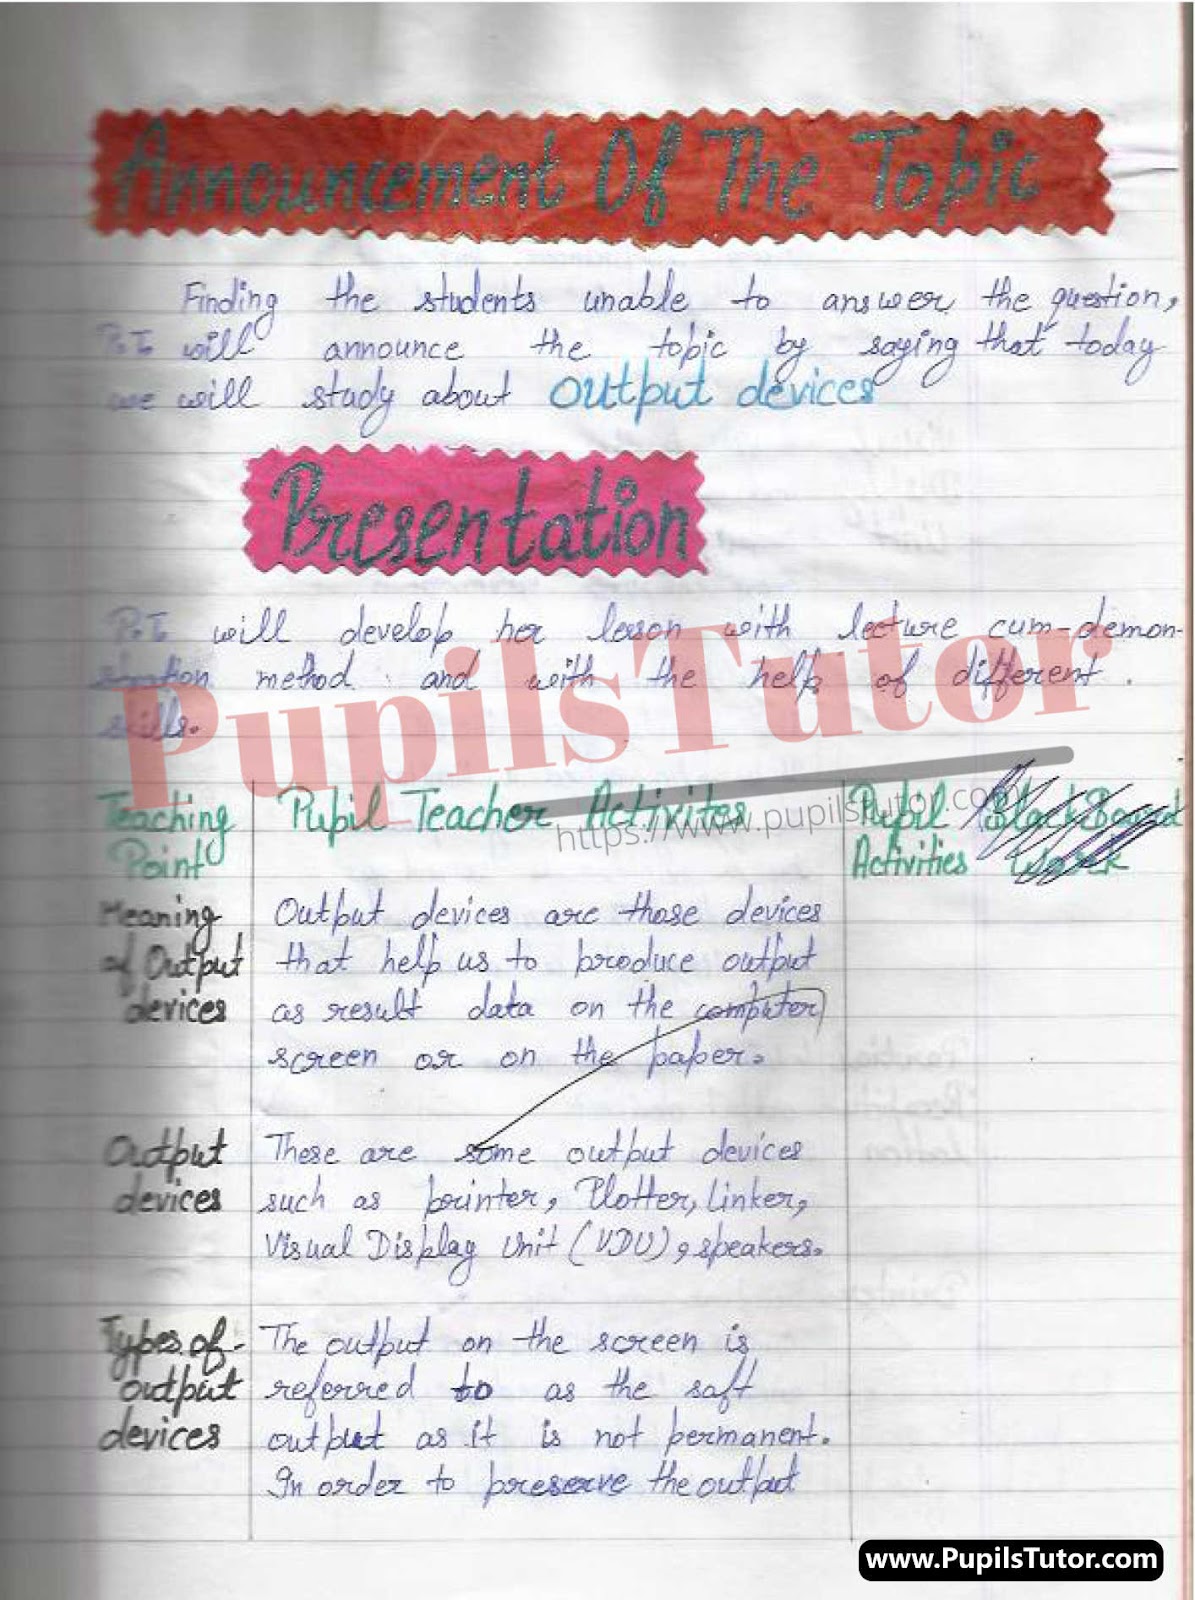 Class/Grade 6 To 9 Computer Simulated Teaching Skill Lesson Plan On Types Of Output Devices For CBSE NCERT KVS School And University College Teachers – (Page And Image Number 3) – www.pupilstutor.com